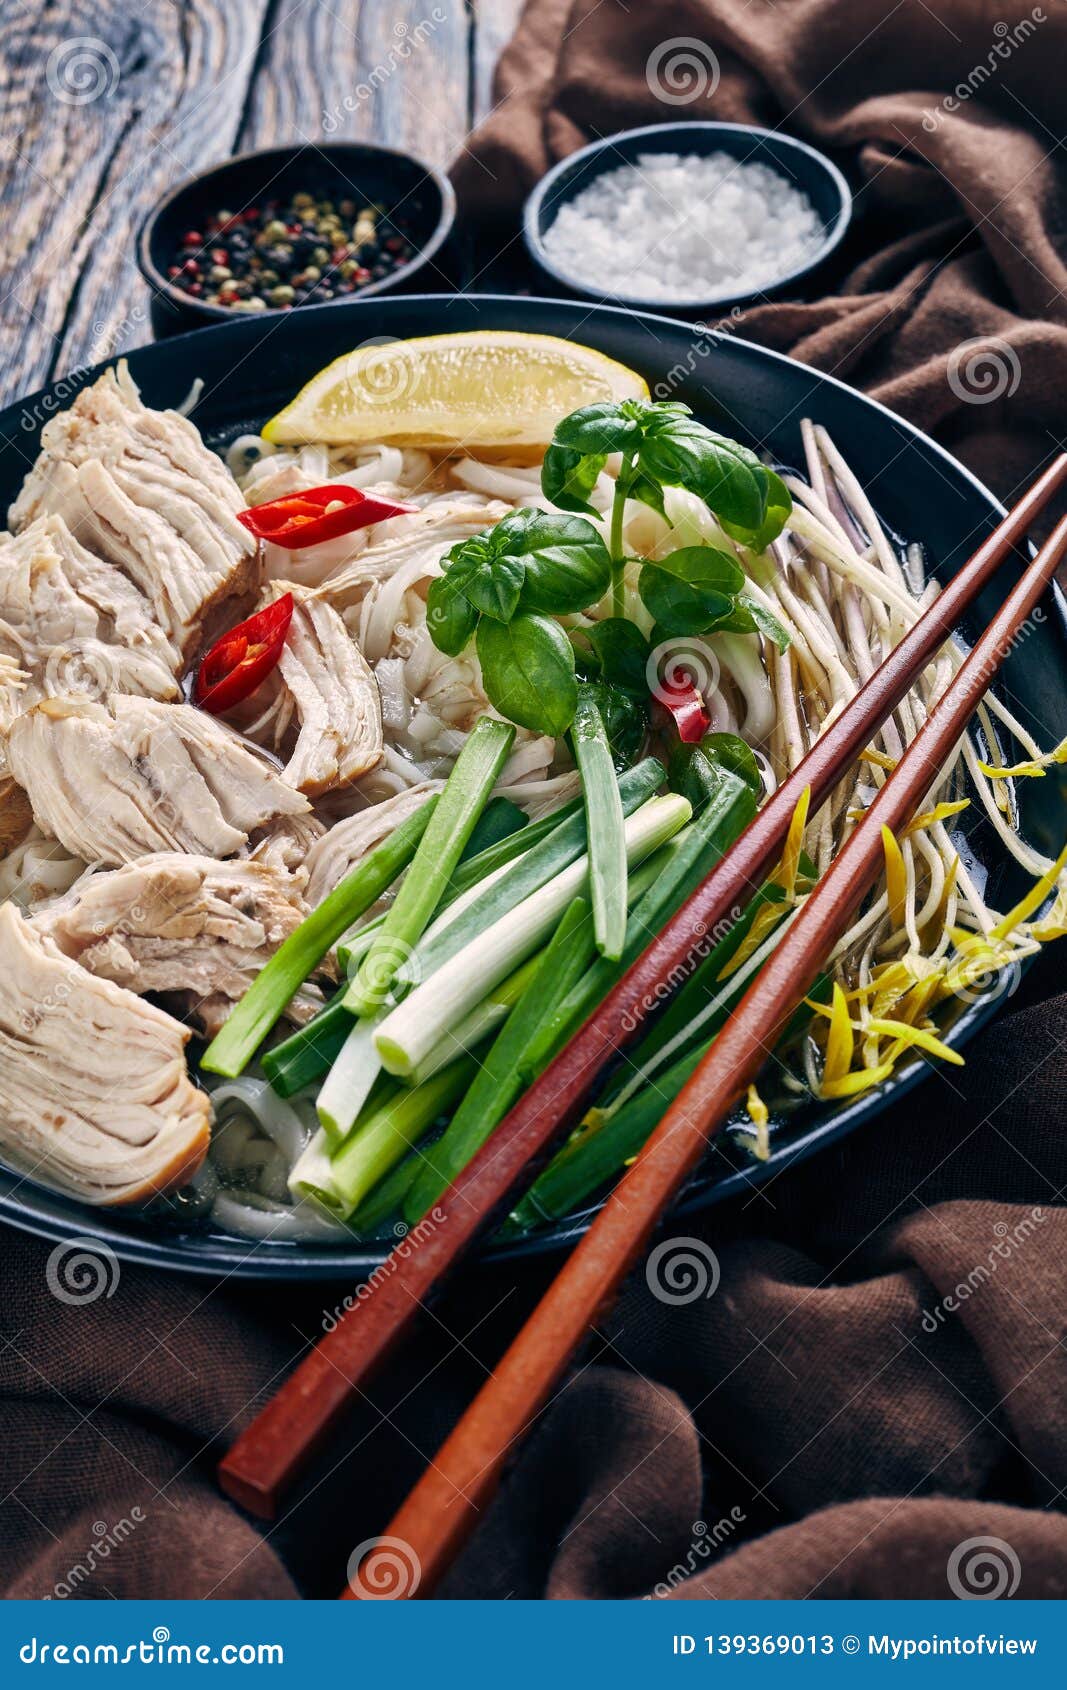 Soup Pho Ga with Chicken Breast, Rice Noodles Stock Image - Image of ...